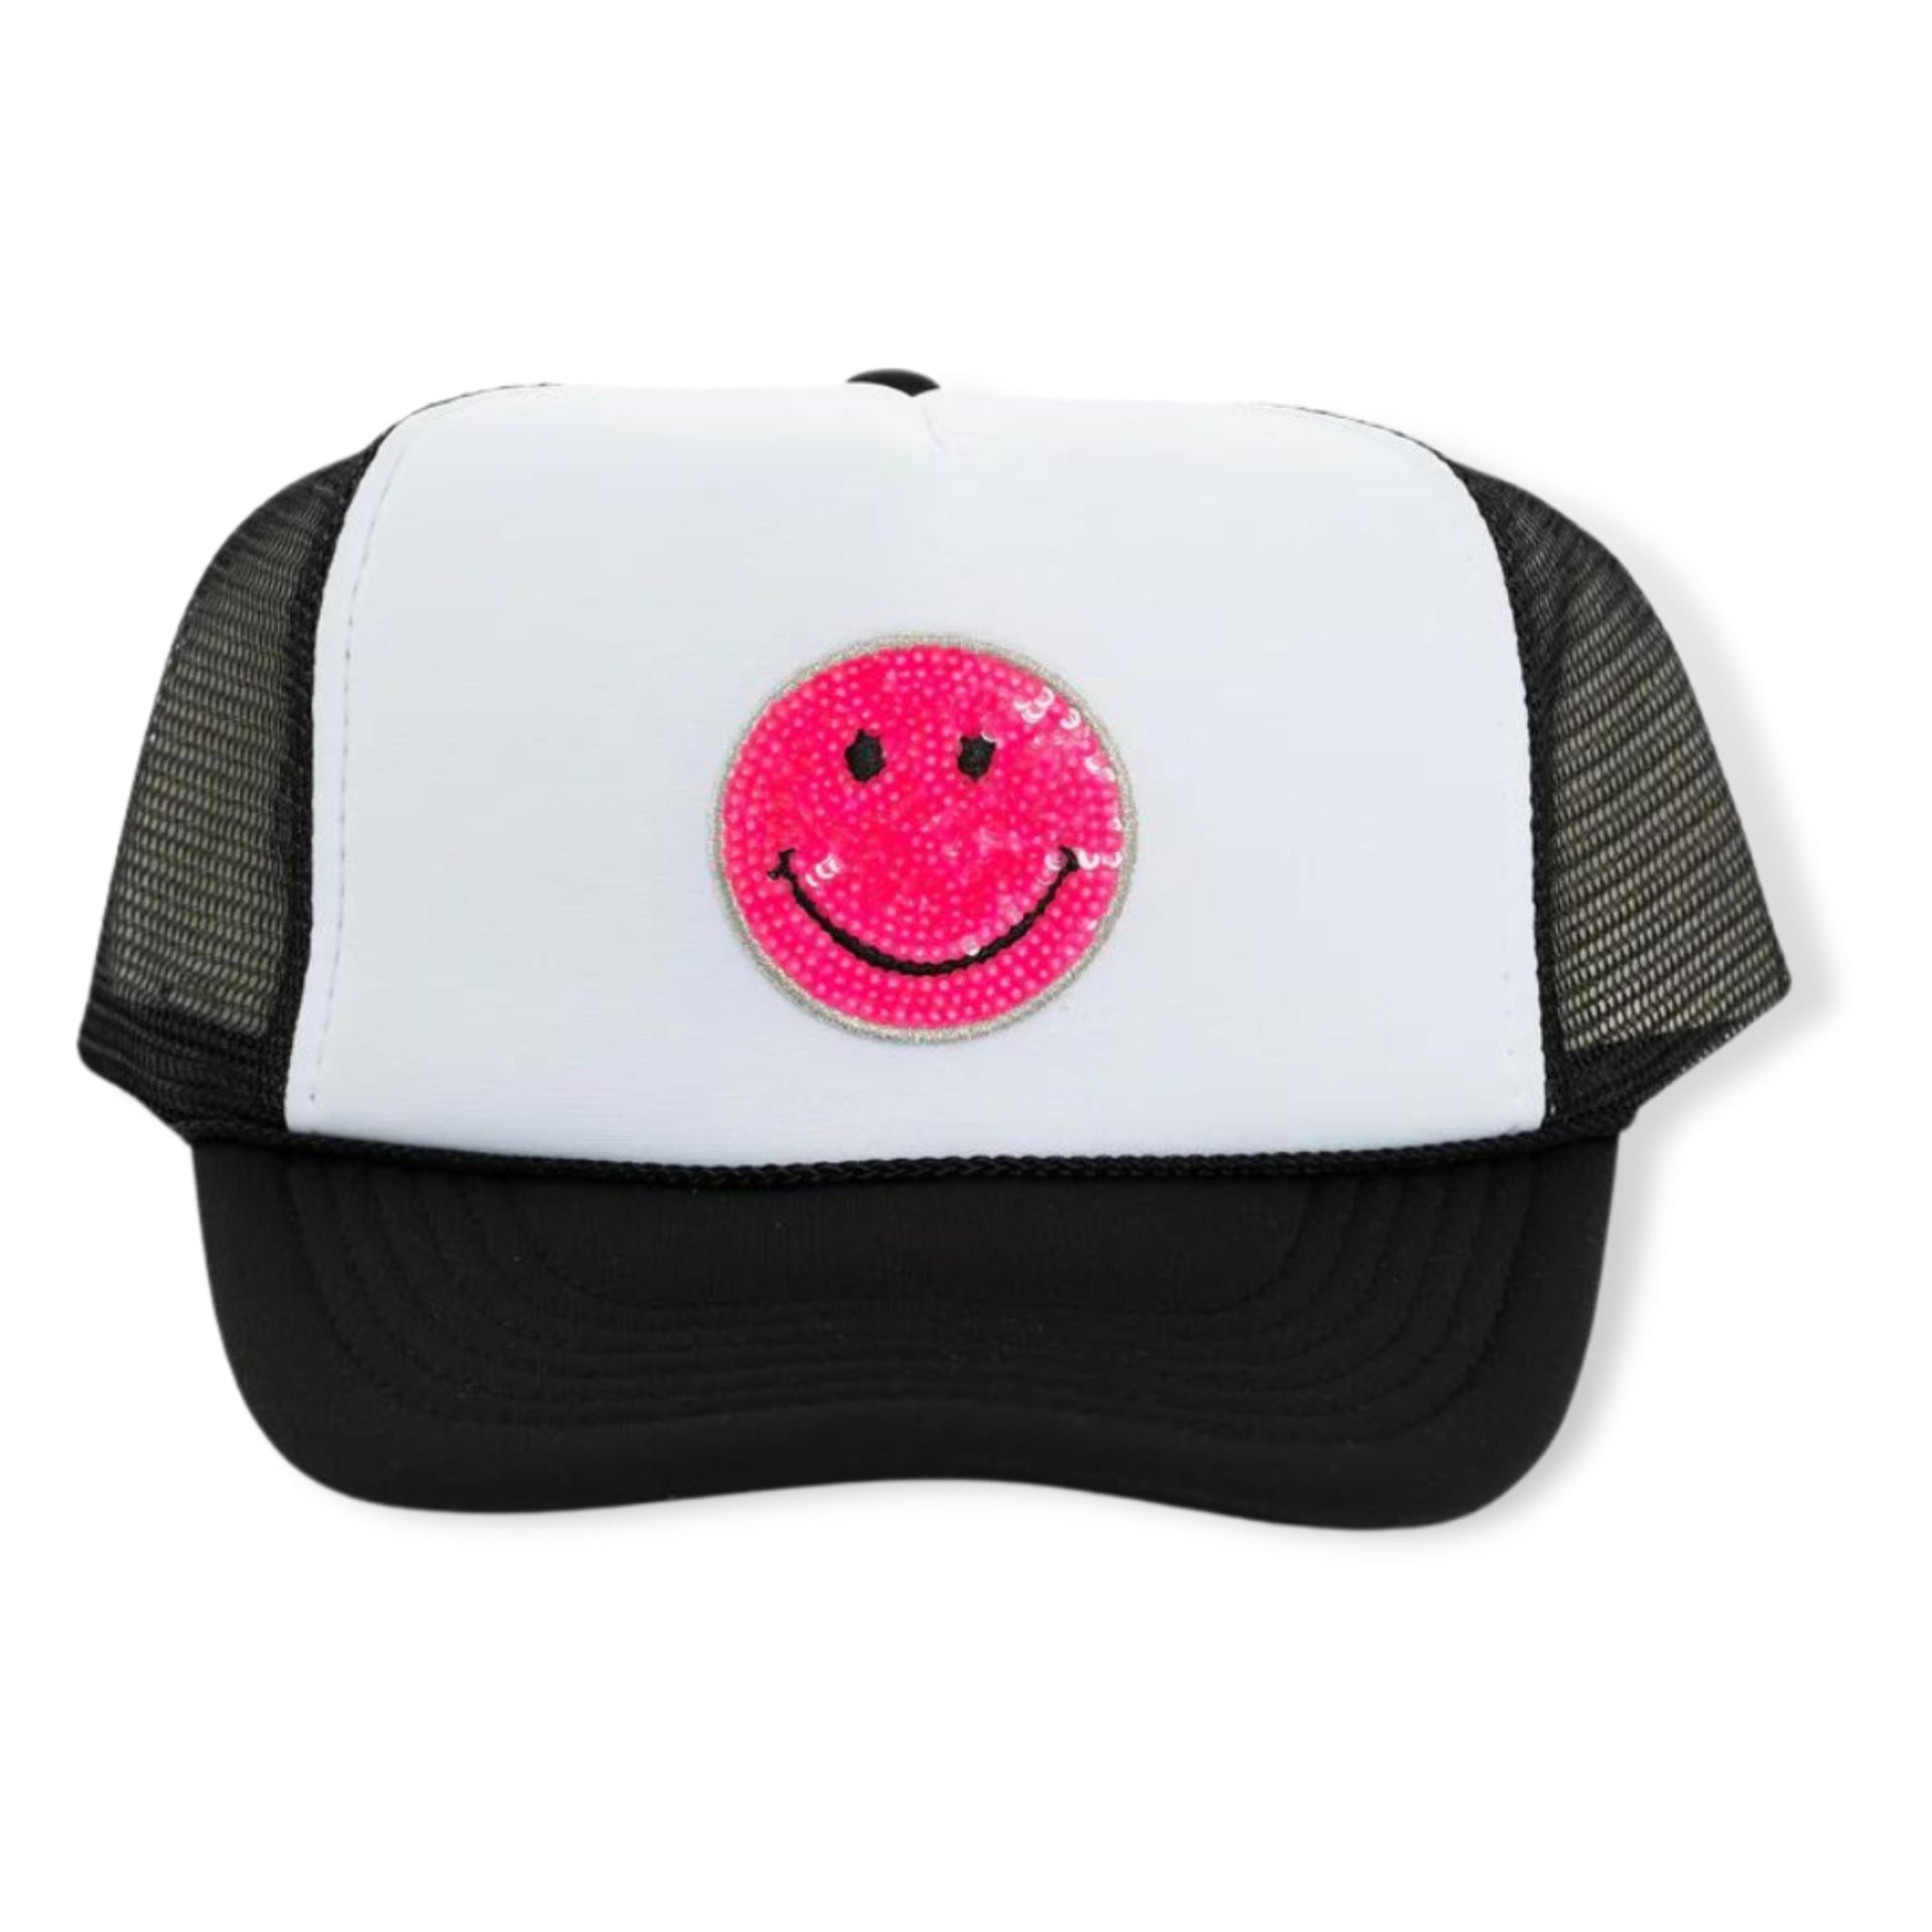 Malibu Sugar Trucker Hat with Sequin Smiley Face Patch – a Spirit Animal